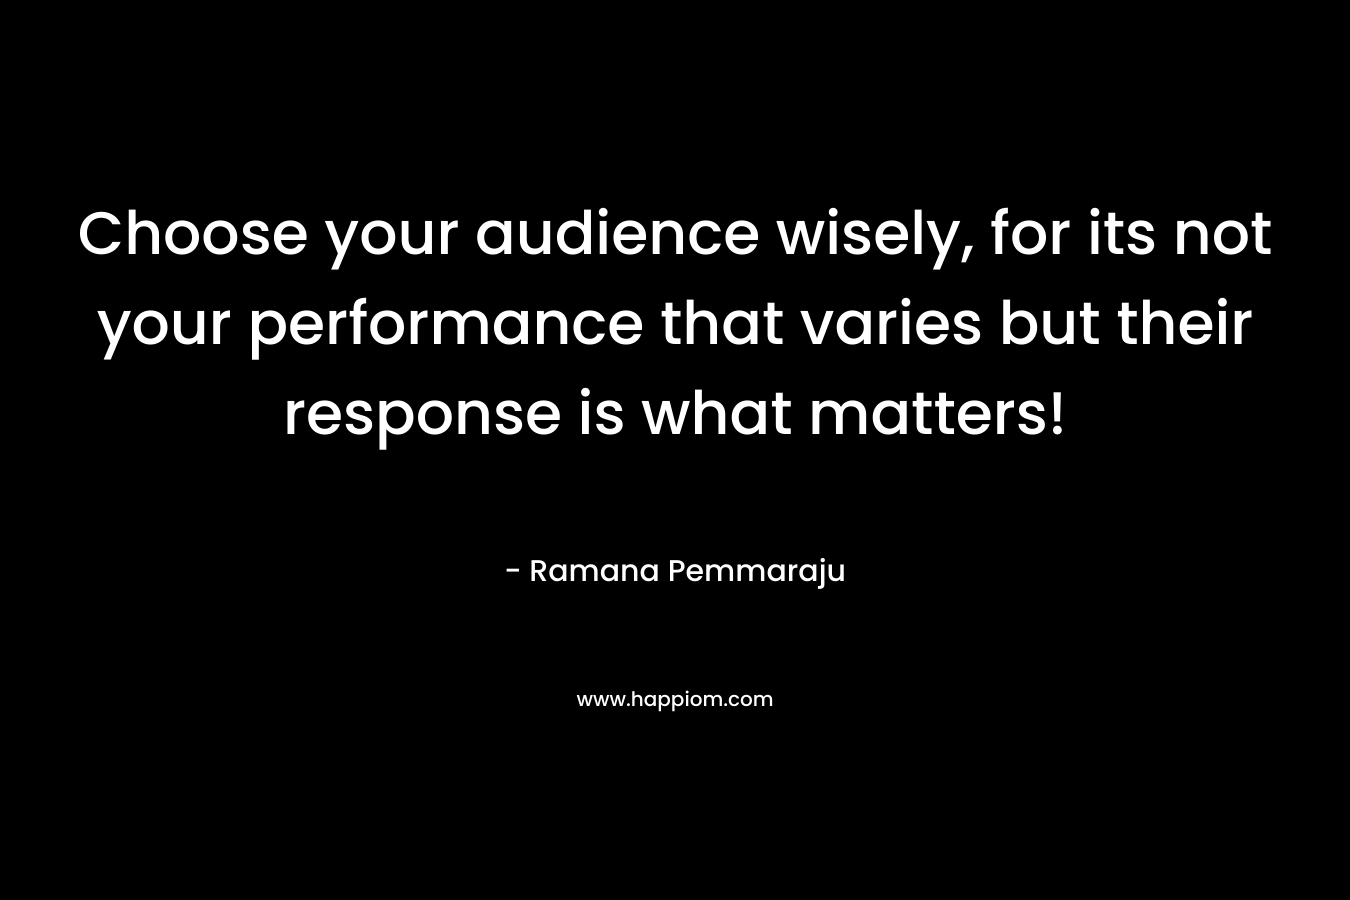 Choose your audience wisely, for its not your performance that varies but their response is what matters!